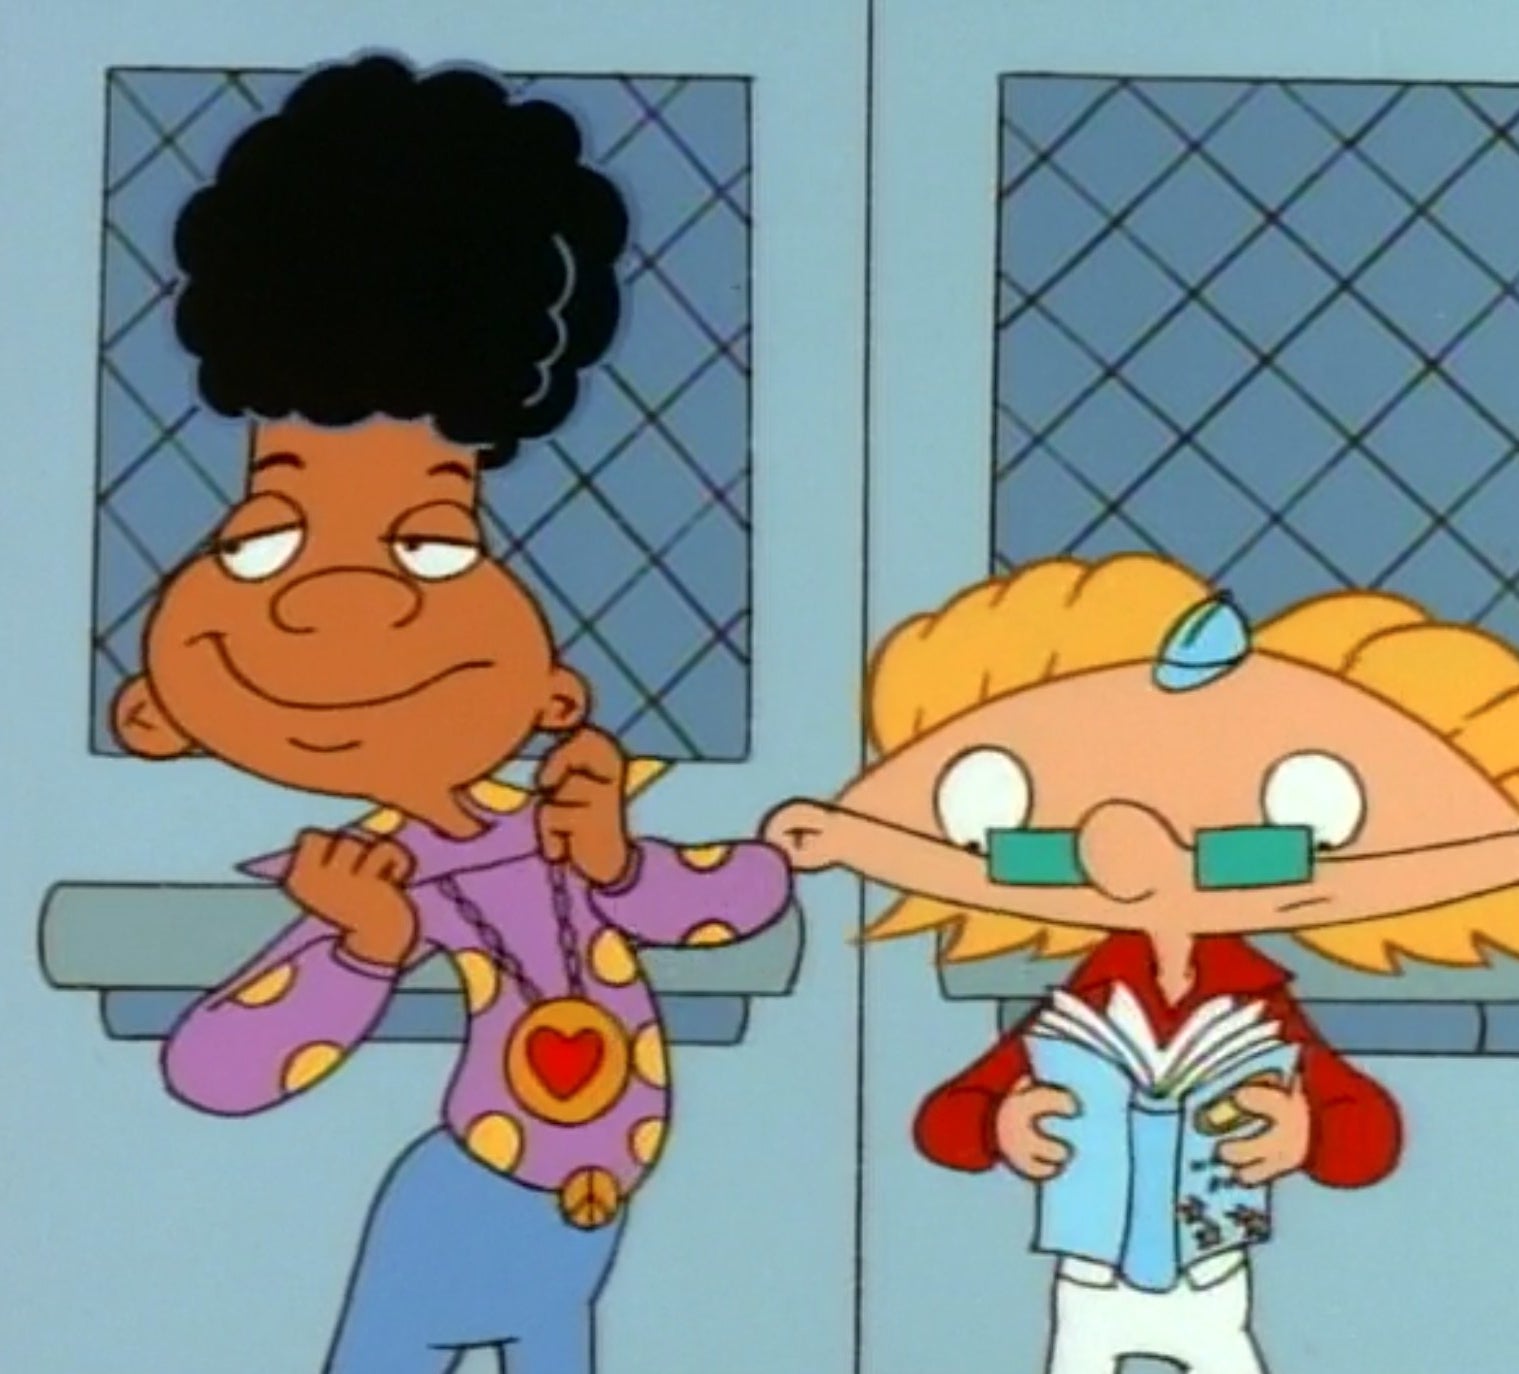 Arnold and Gerald arrive at a sixth grade dance wearing stylish outfits